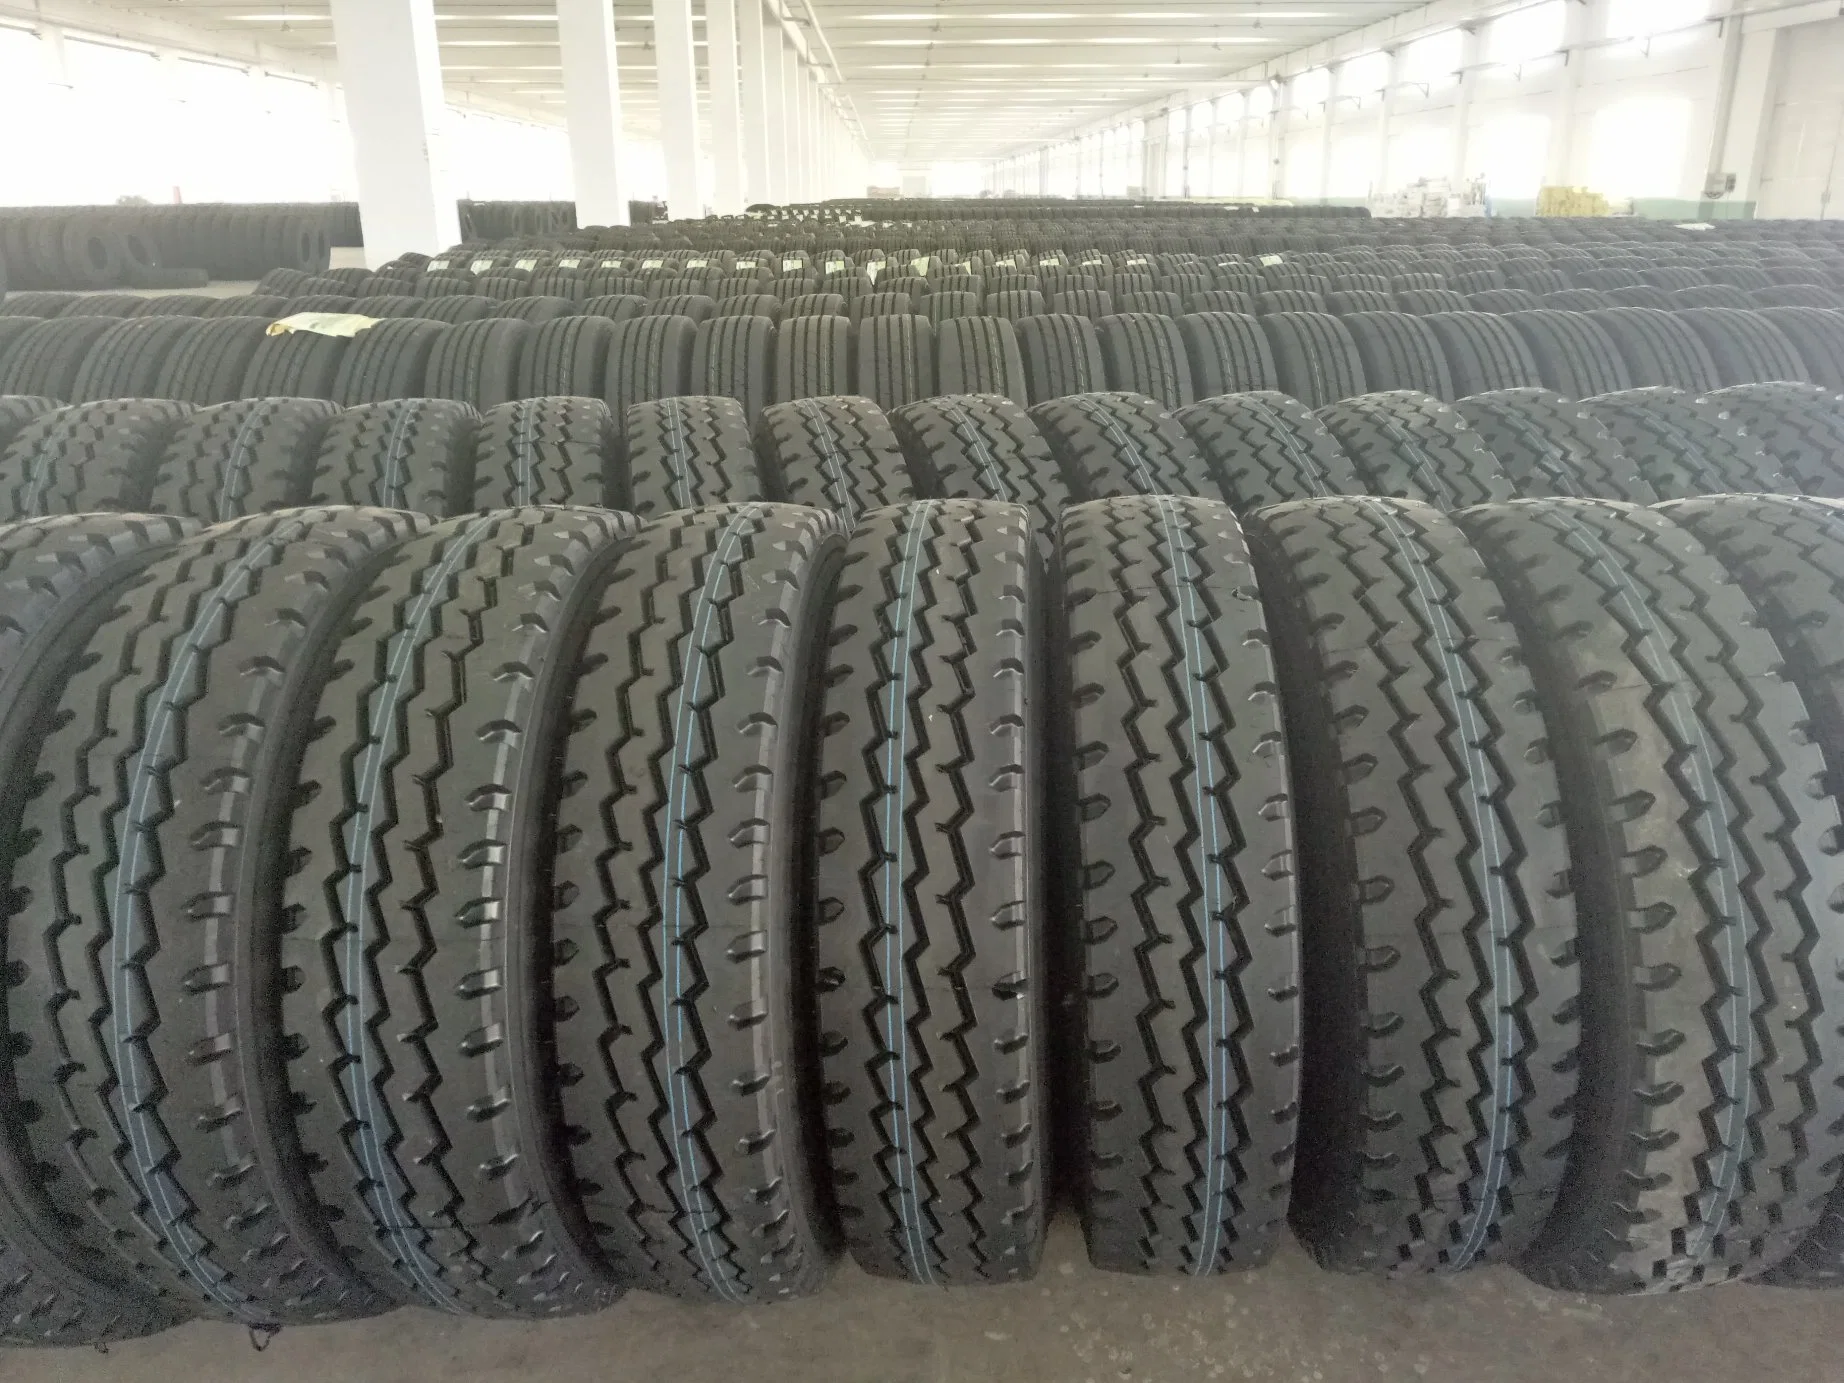 TBR Truck Tyre with 13r22.5 Trm07 Radial Tubeless Truck Tire